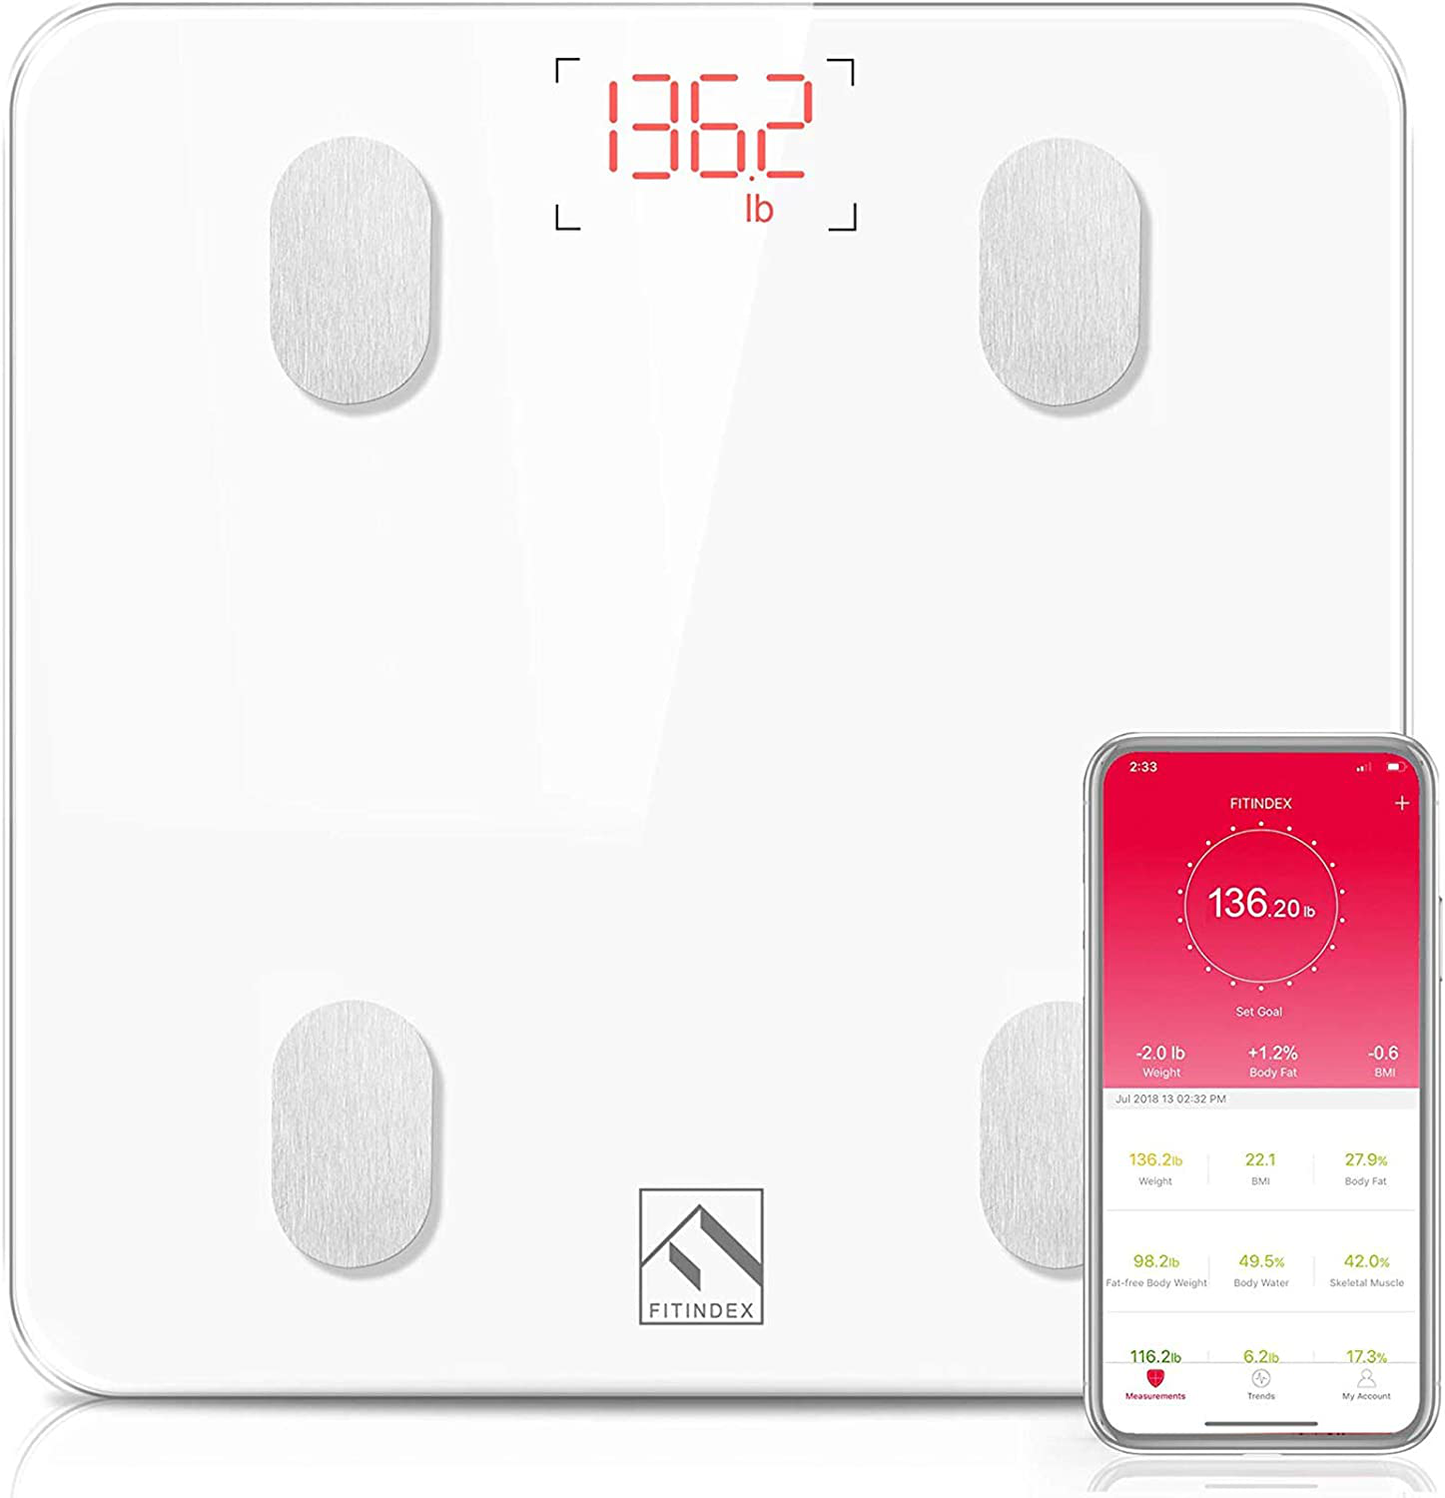 FITINDEX Bluetooth Body Fat Scale, Smart Wireless BMI Bathroom Weight Scale Body Composition Monitor Health Analyzer with Smartphone App